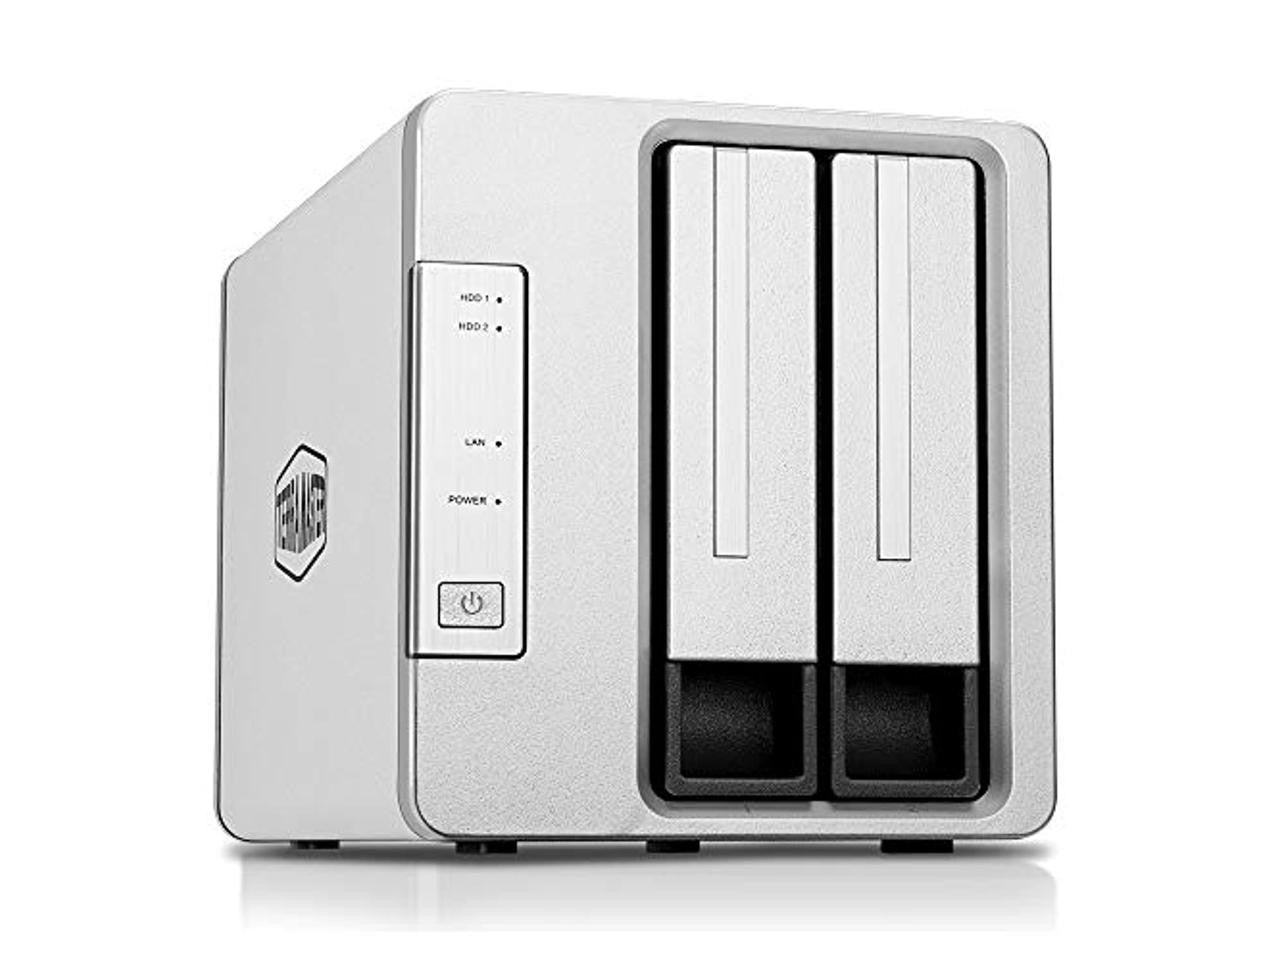 TerraMaster F2-210 2-Bay Home NAS with 6TB (2 x 3TB) of Western Digital Red Plus Drives Fully Assembled and Tested